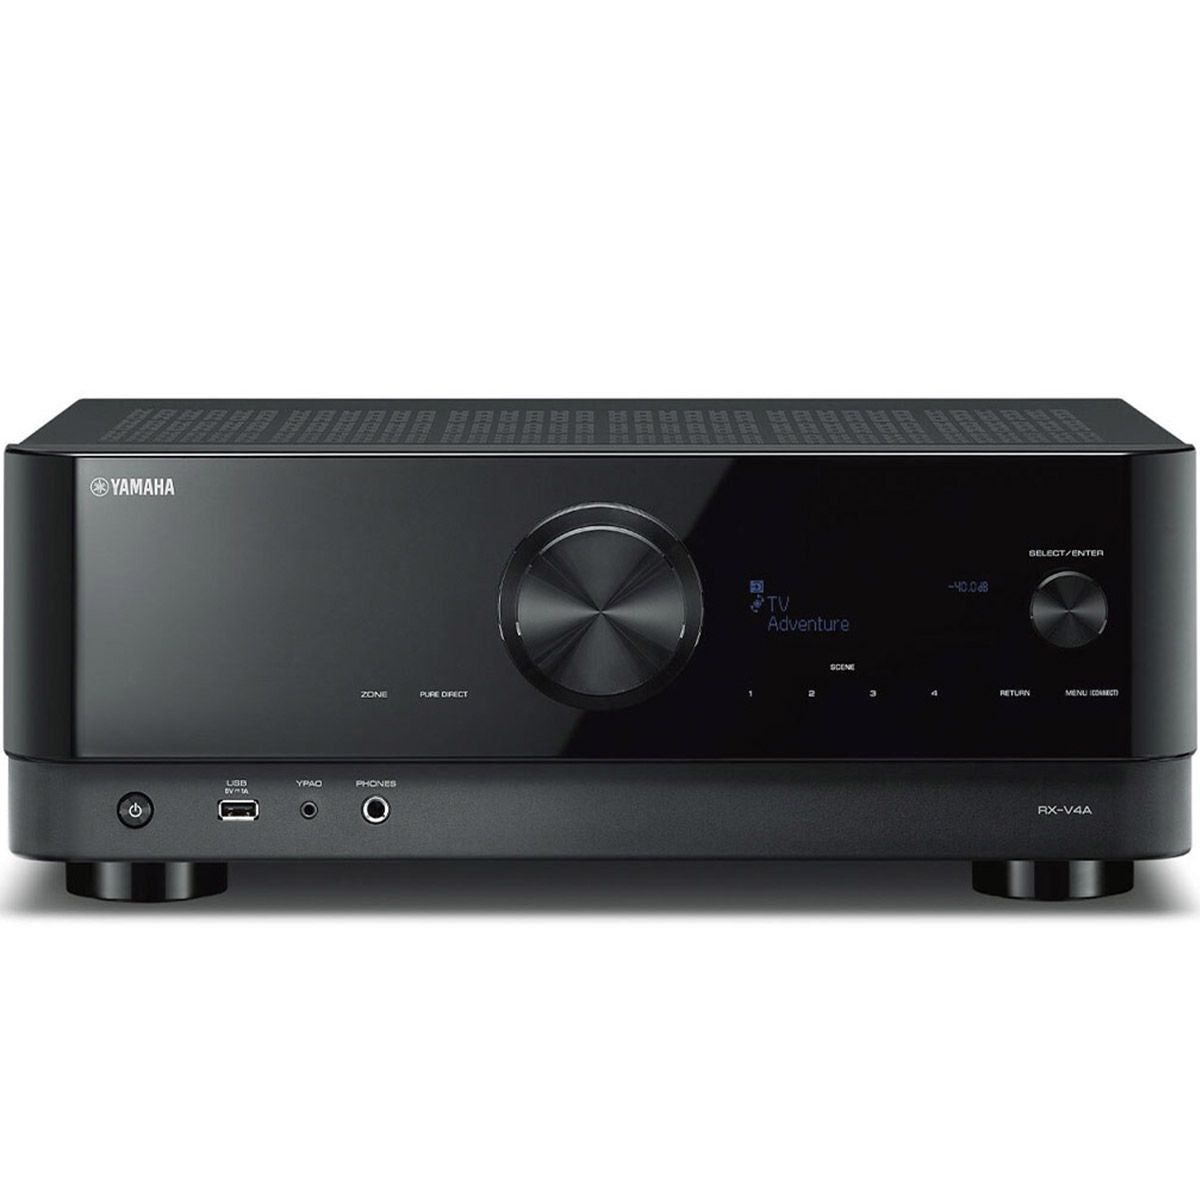 Yamaha RX-V4A 5.2-Channel AV Receiver - front view